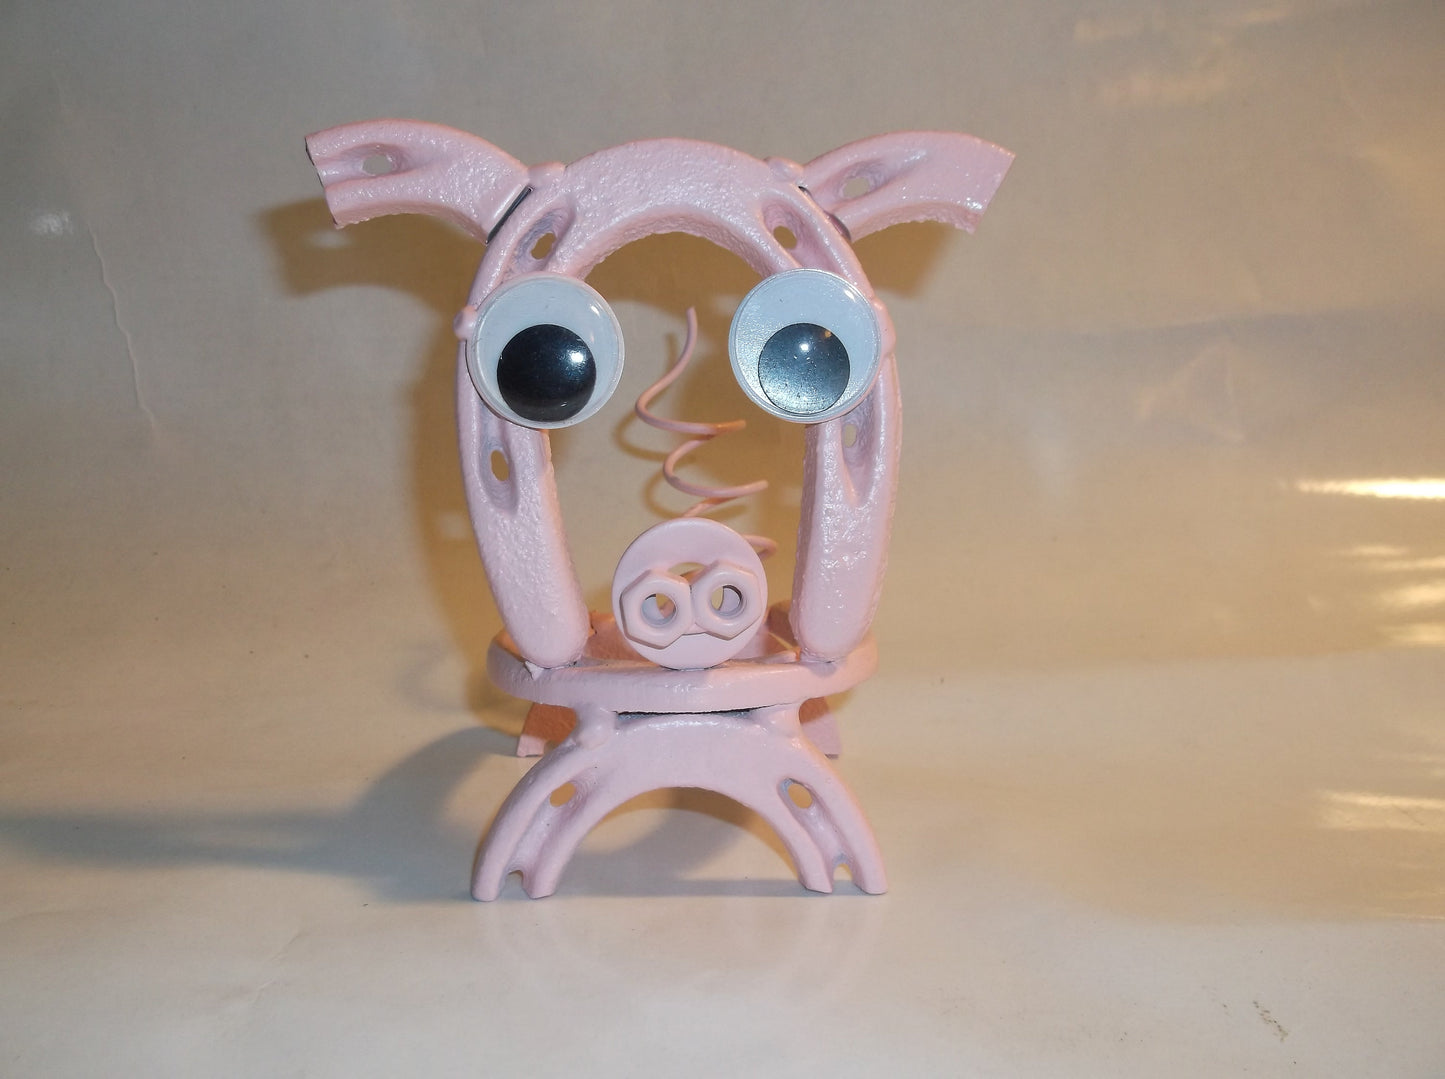 Horseshoe Pig, Pink Miniature Piggy, Welded Metal Arts and Crafts